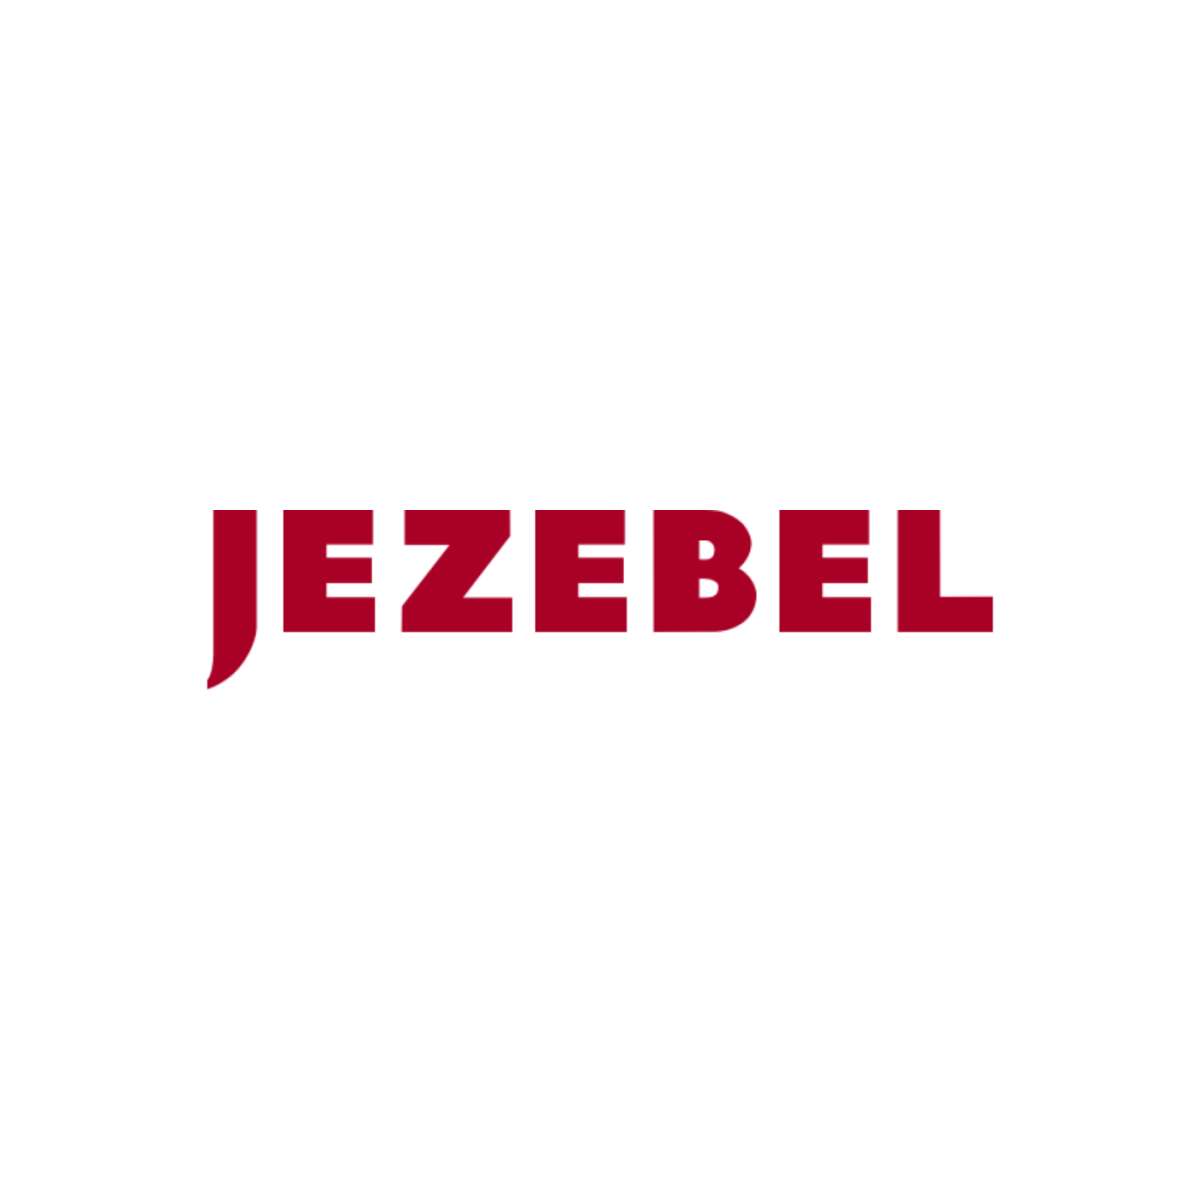 Digital culture and entertainment insights daily: Remembering Jezebel ...